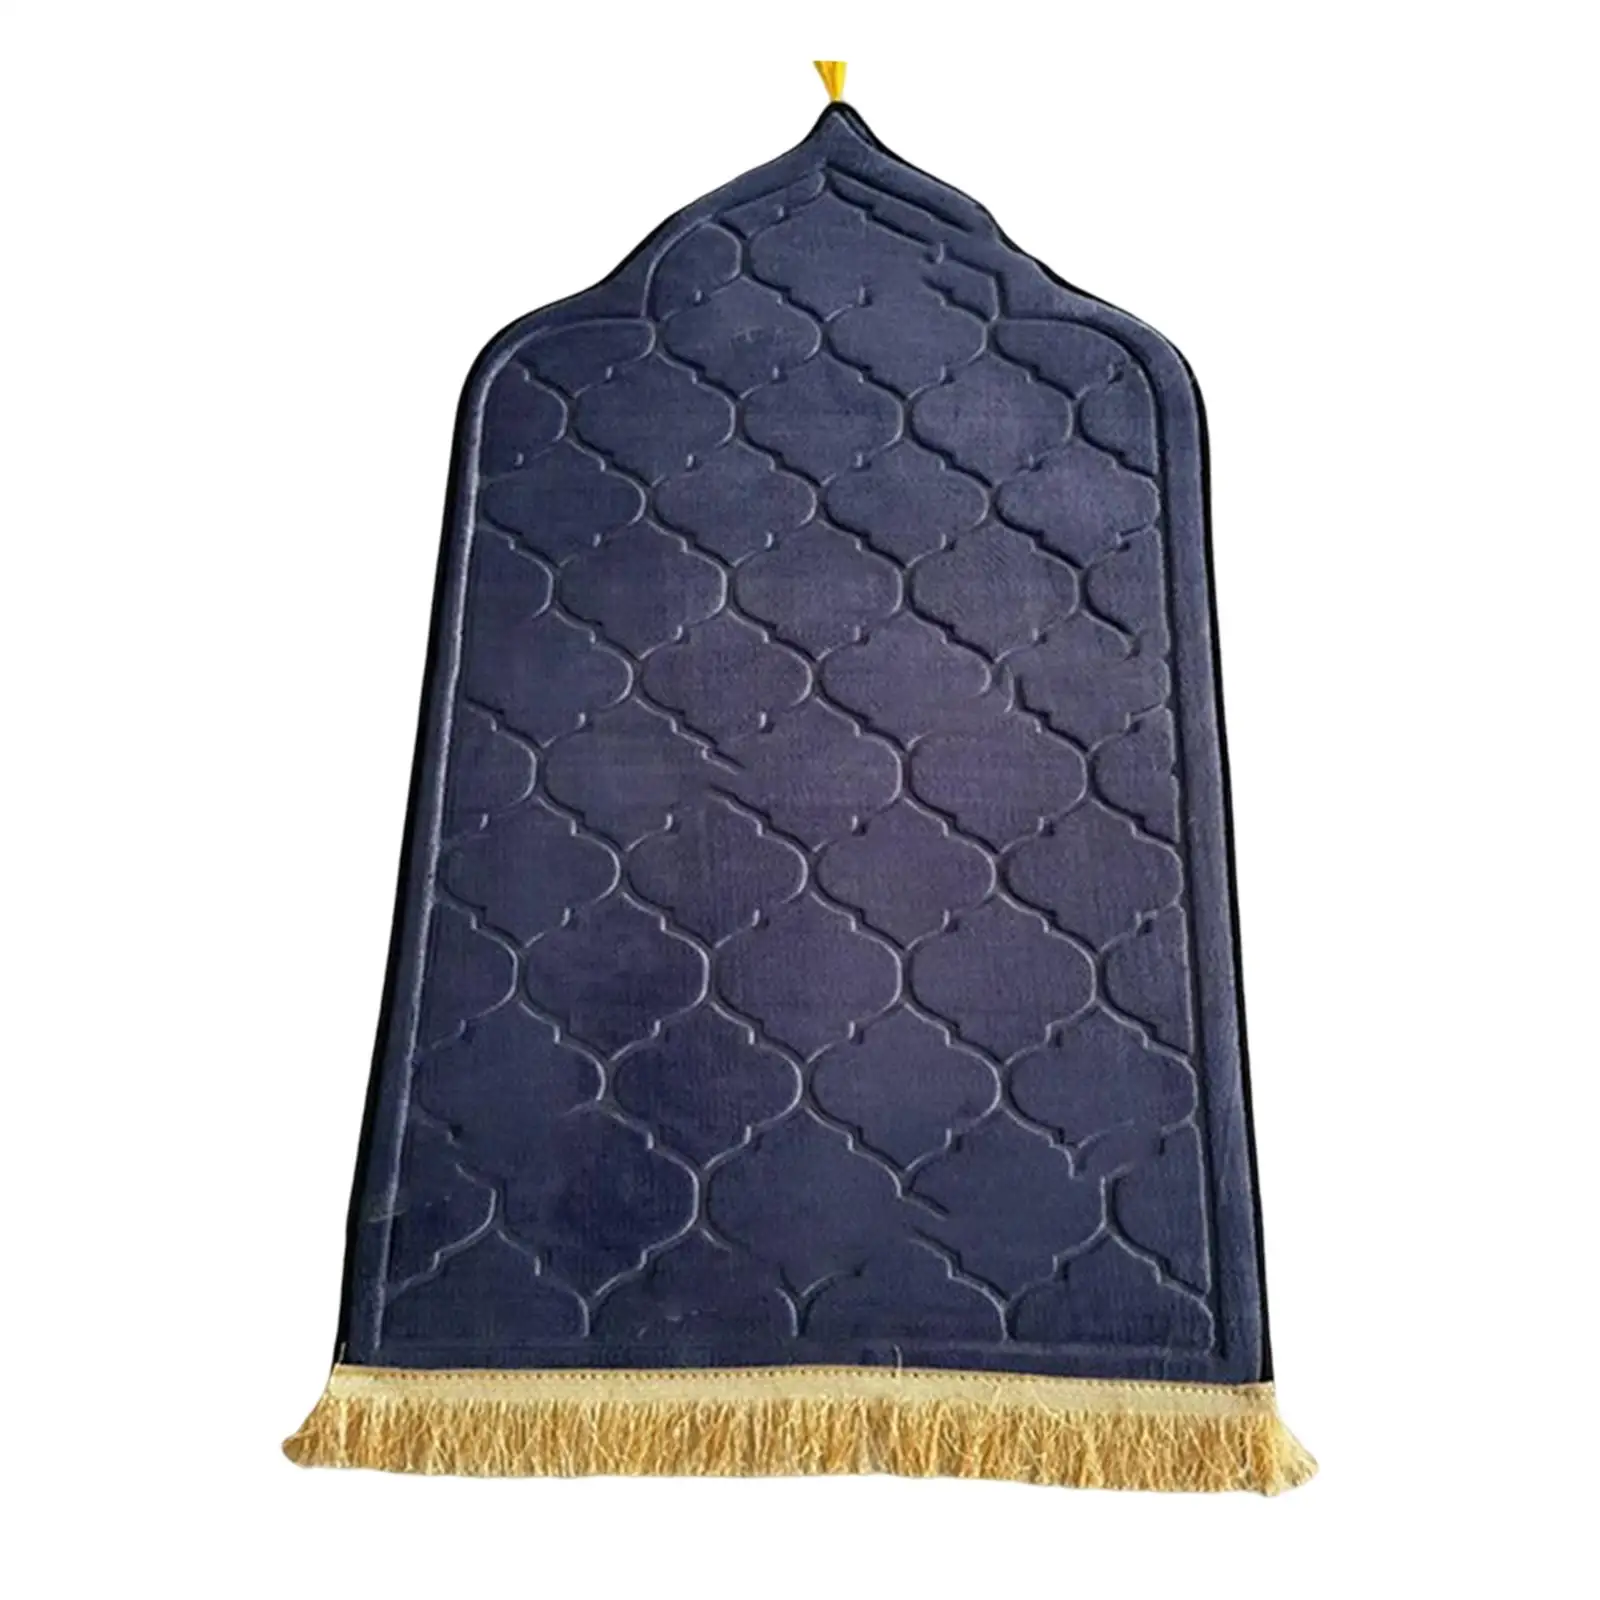 Portable Prayer Rug Collectible Blanket for Outdoor Cafe Bar Bedroom Father Day Gifts